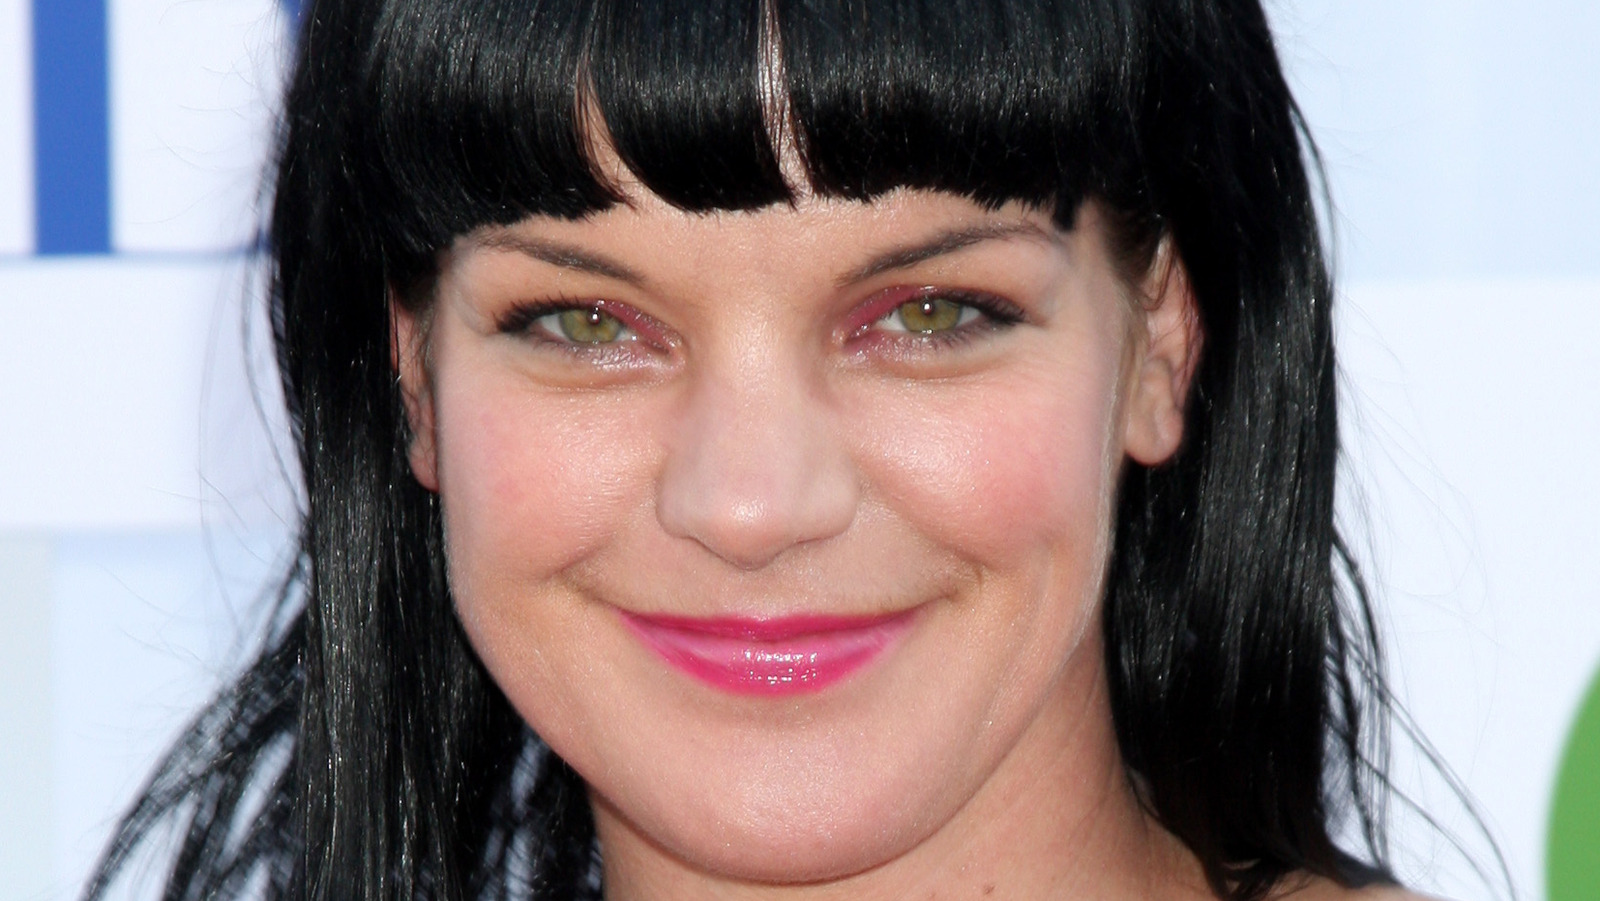 Here's What NCIS Star Pauley Perrette Looks Like Without Makeup